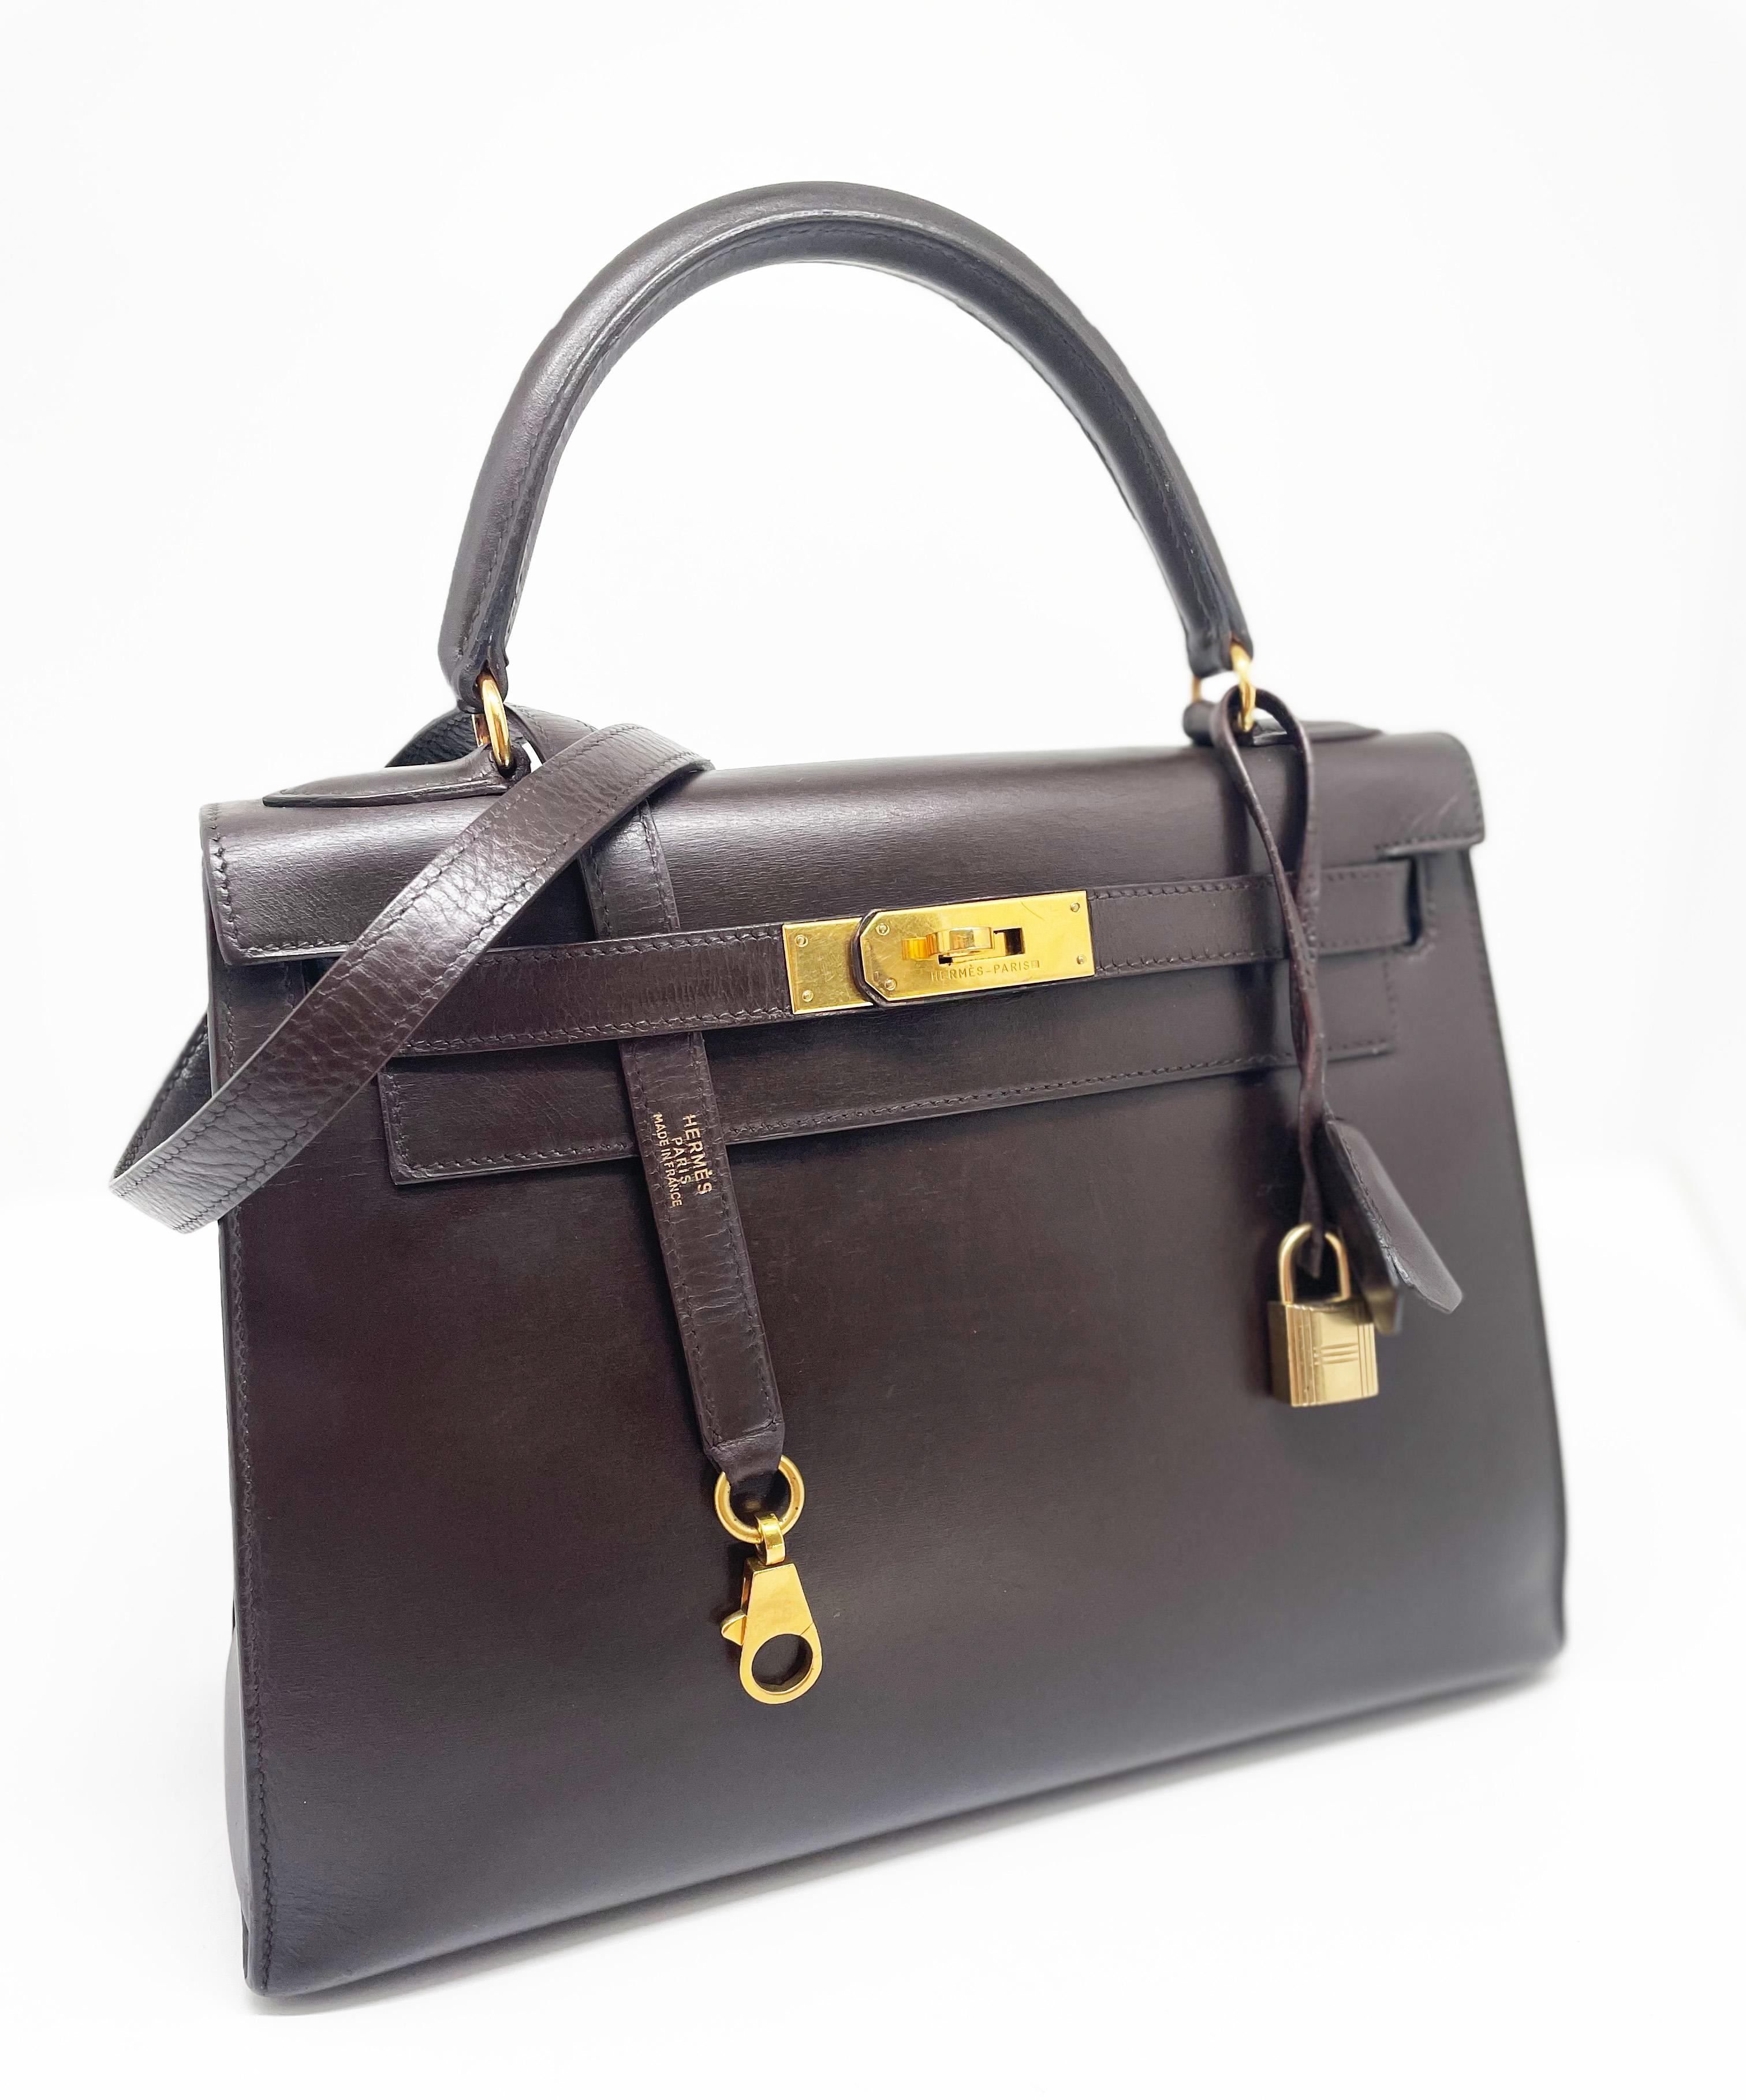 Chocolate Hermès Kelly 28 SELLIER bag in box leather, gold-plated metal hardware, brown box removable shoulder strap, brown box simple handle allowing the bag to be worn in the hand or across the body
Flap closure
Lining in blue leather, one zipped